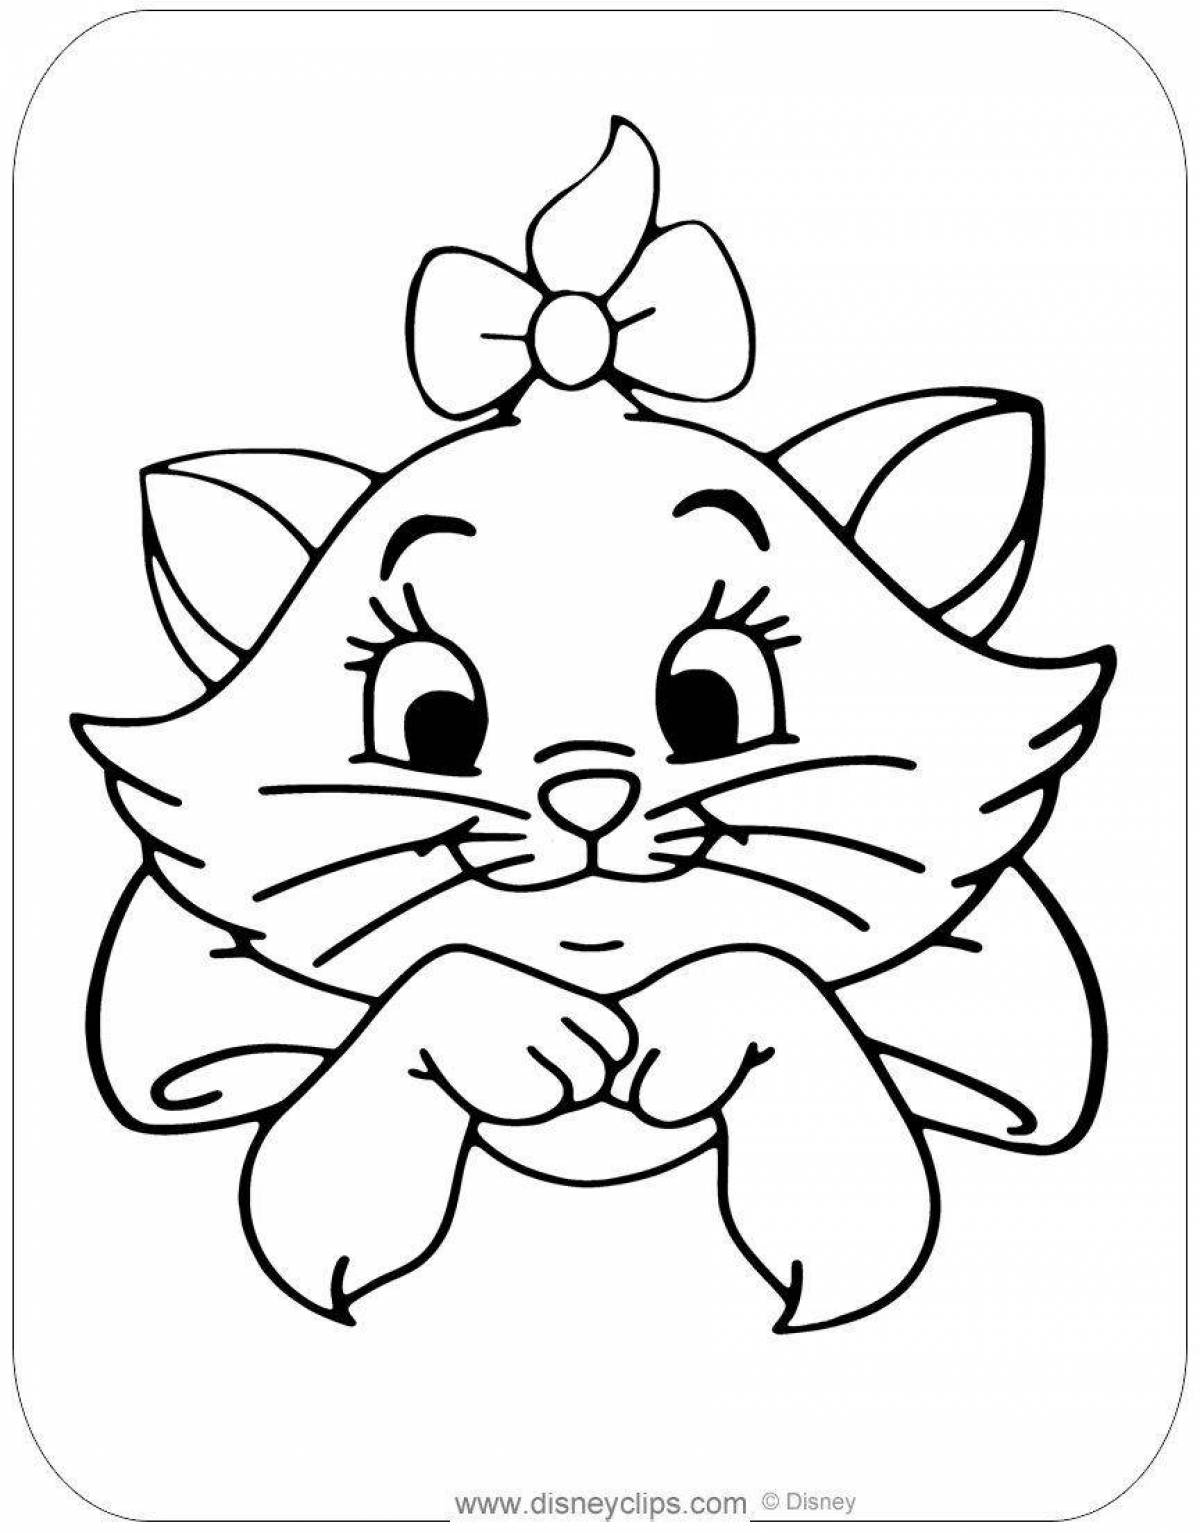 Vibrant marie kitty coloring page